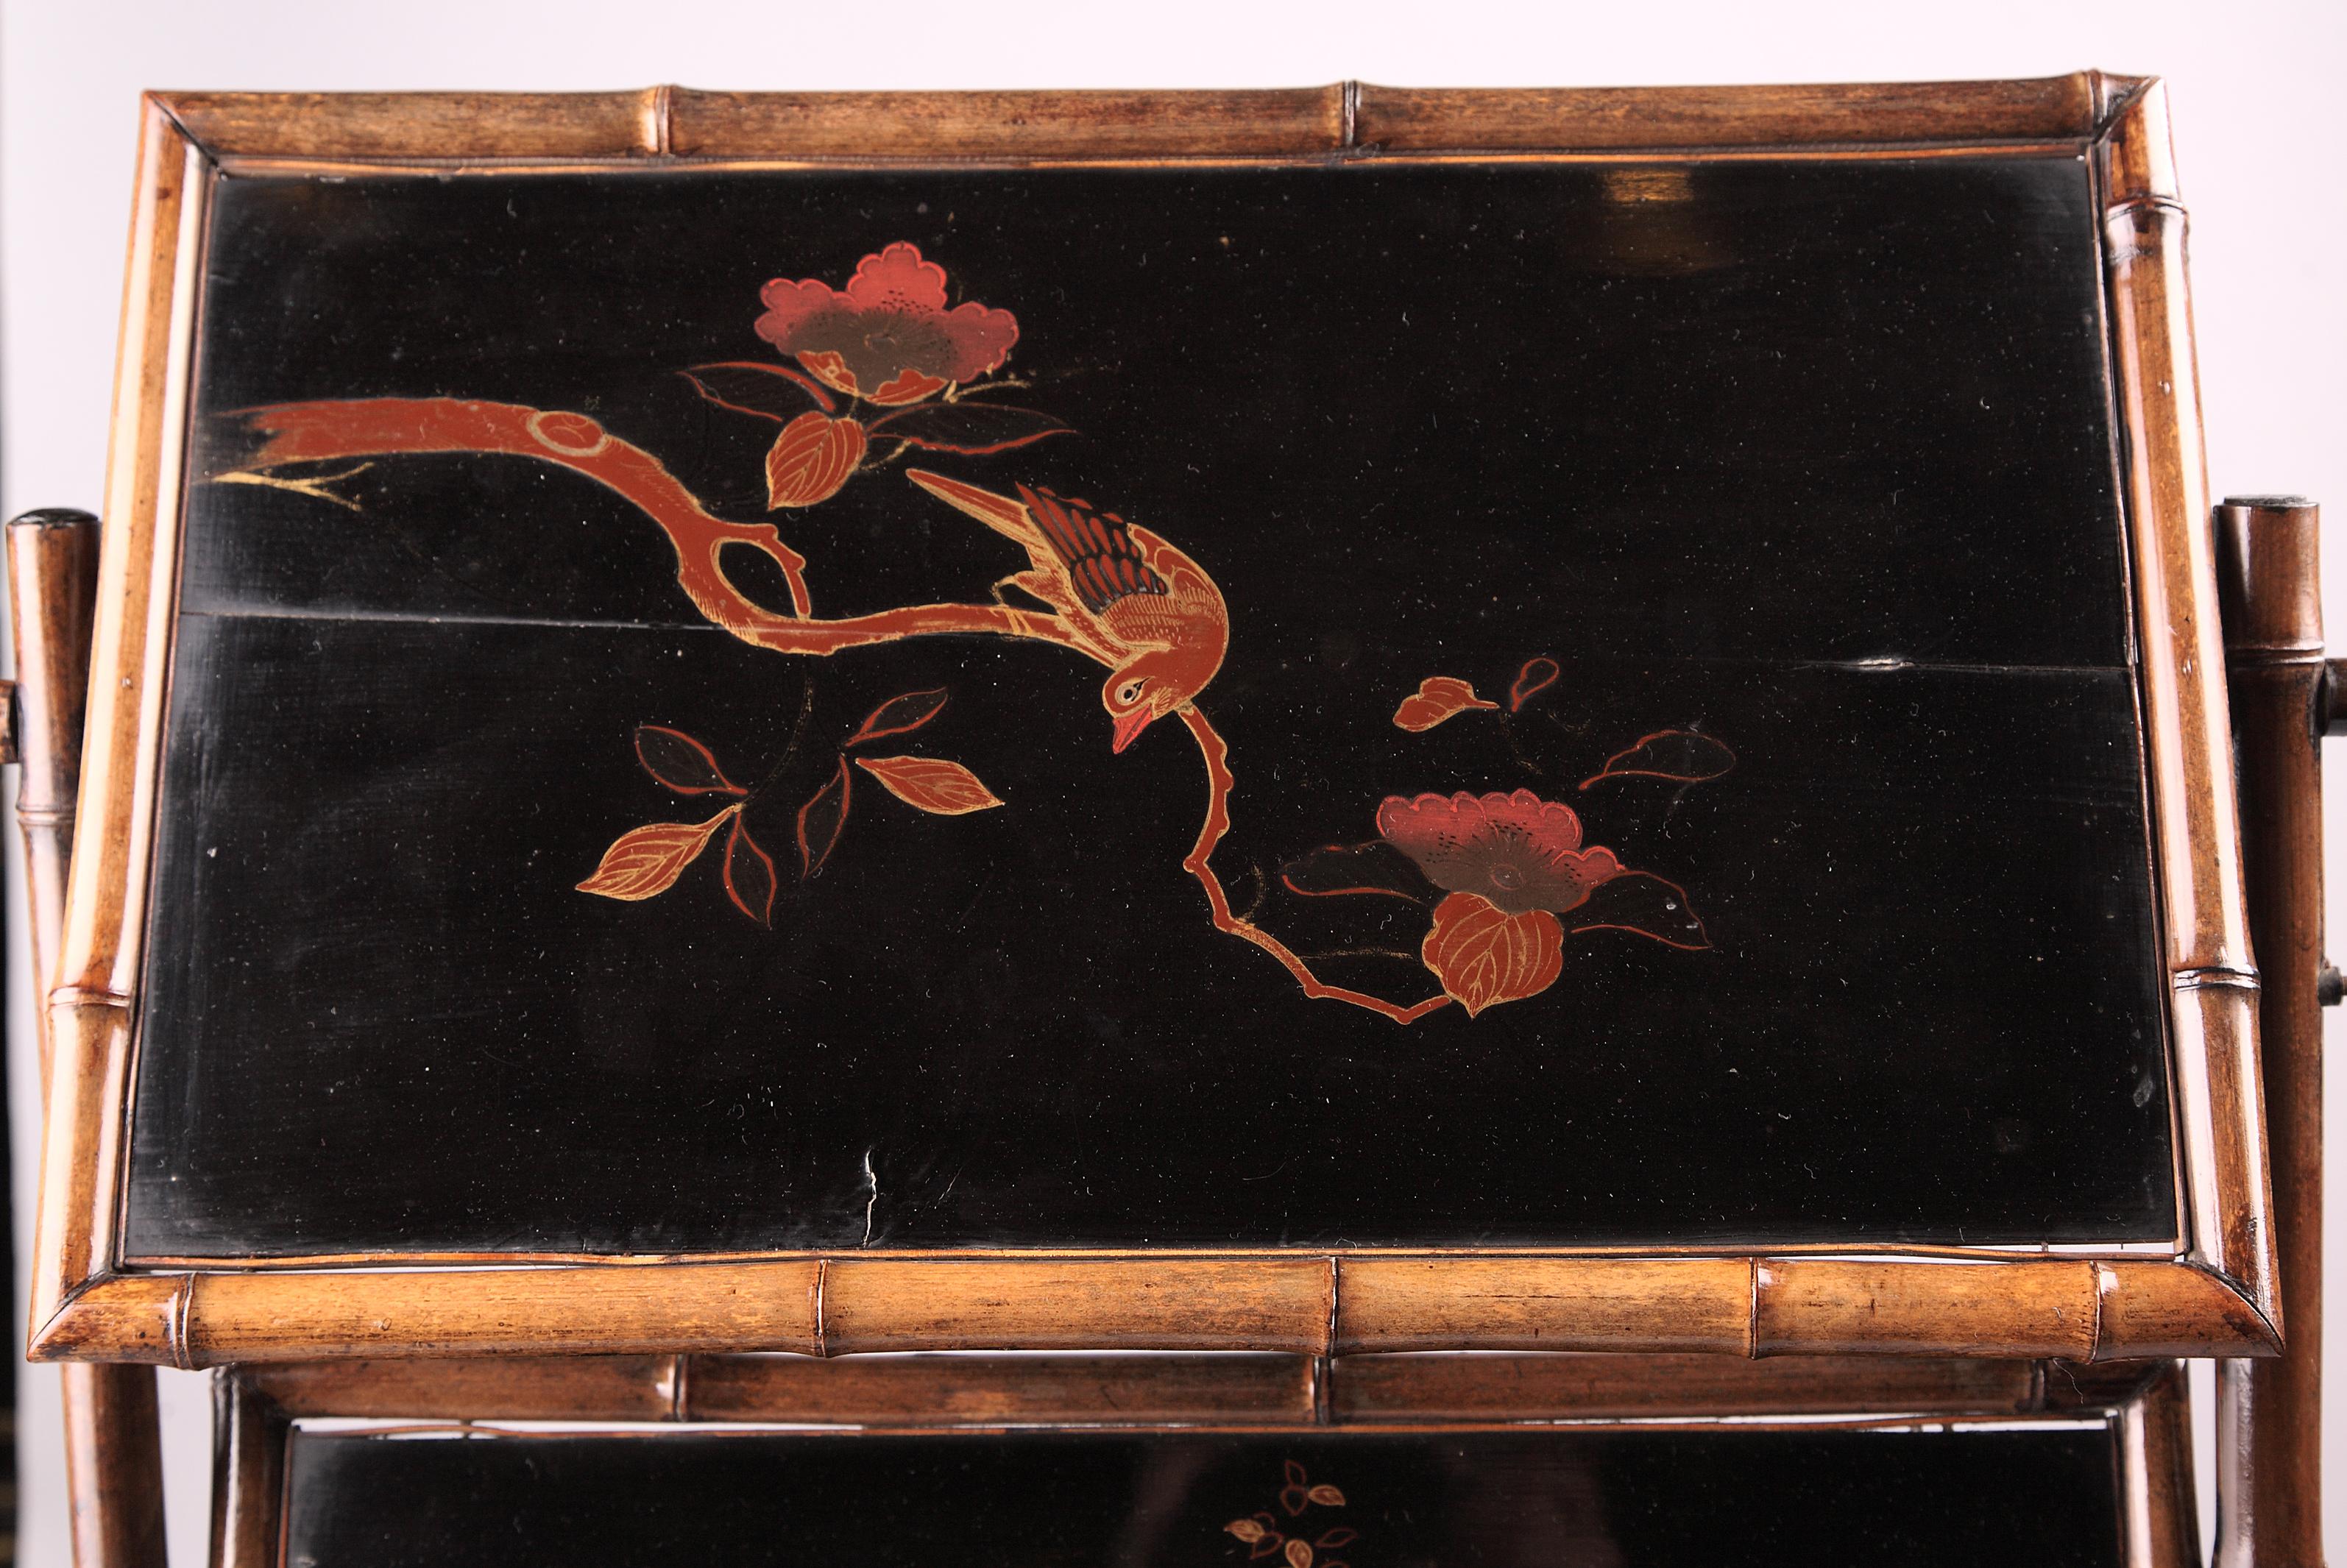 French Japan Lacquer Servant Table Attributed to A. Perret & E. Vibert, France, c. 1880